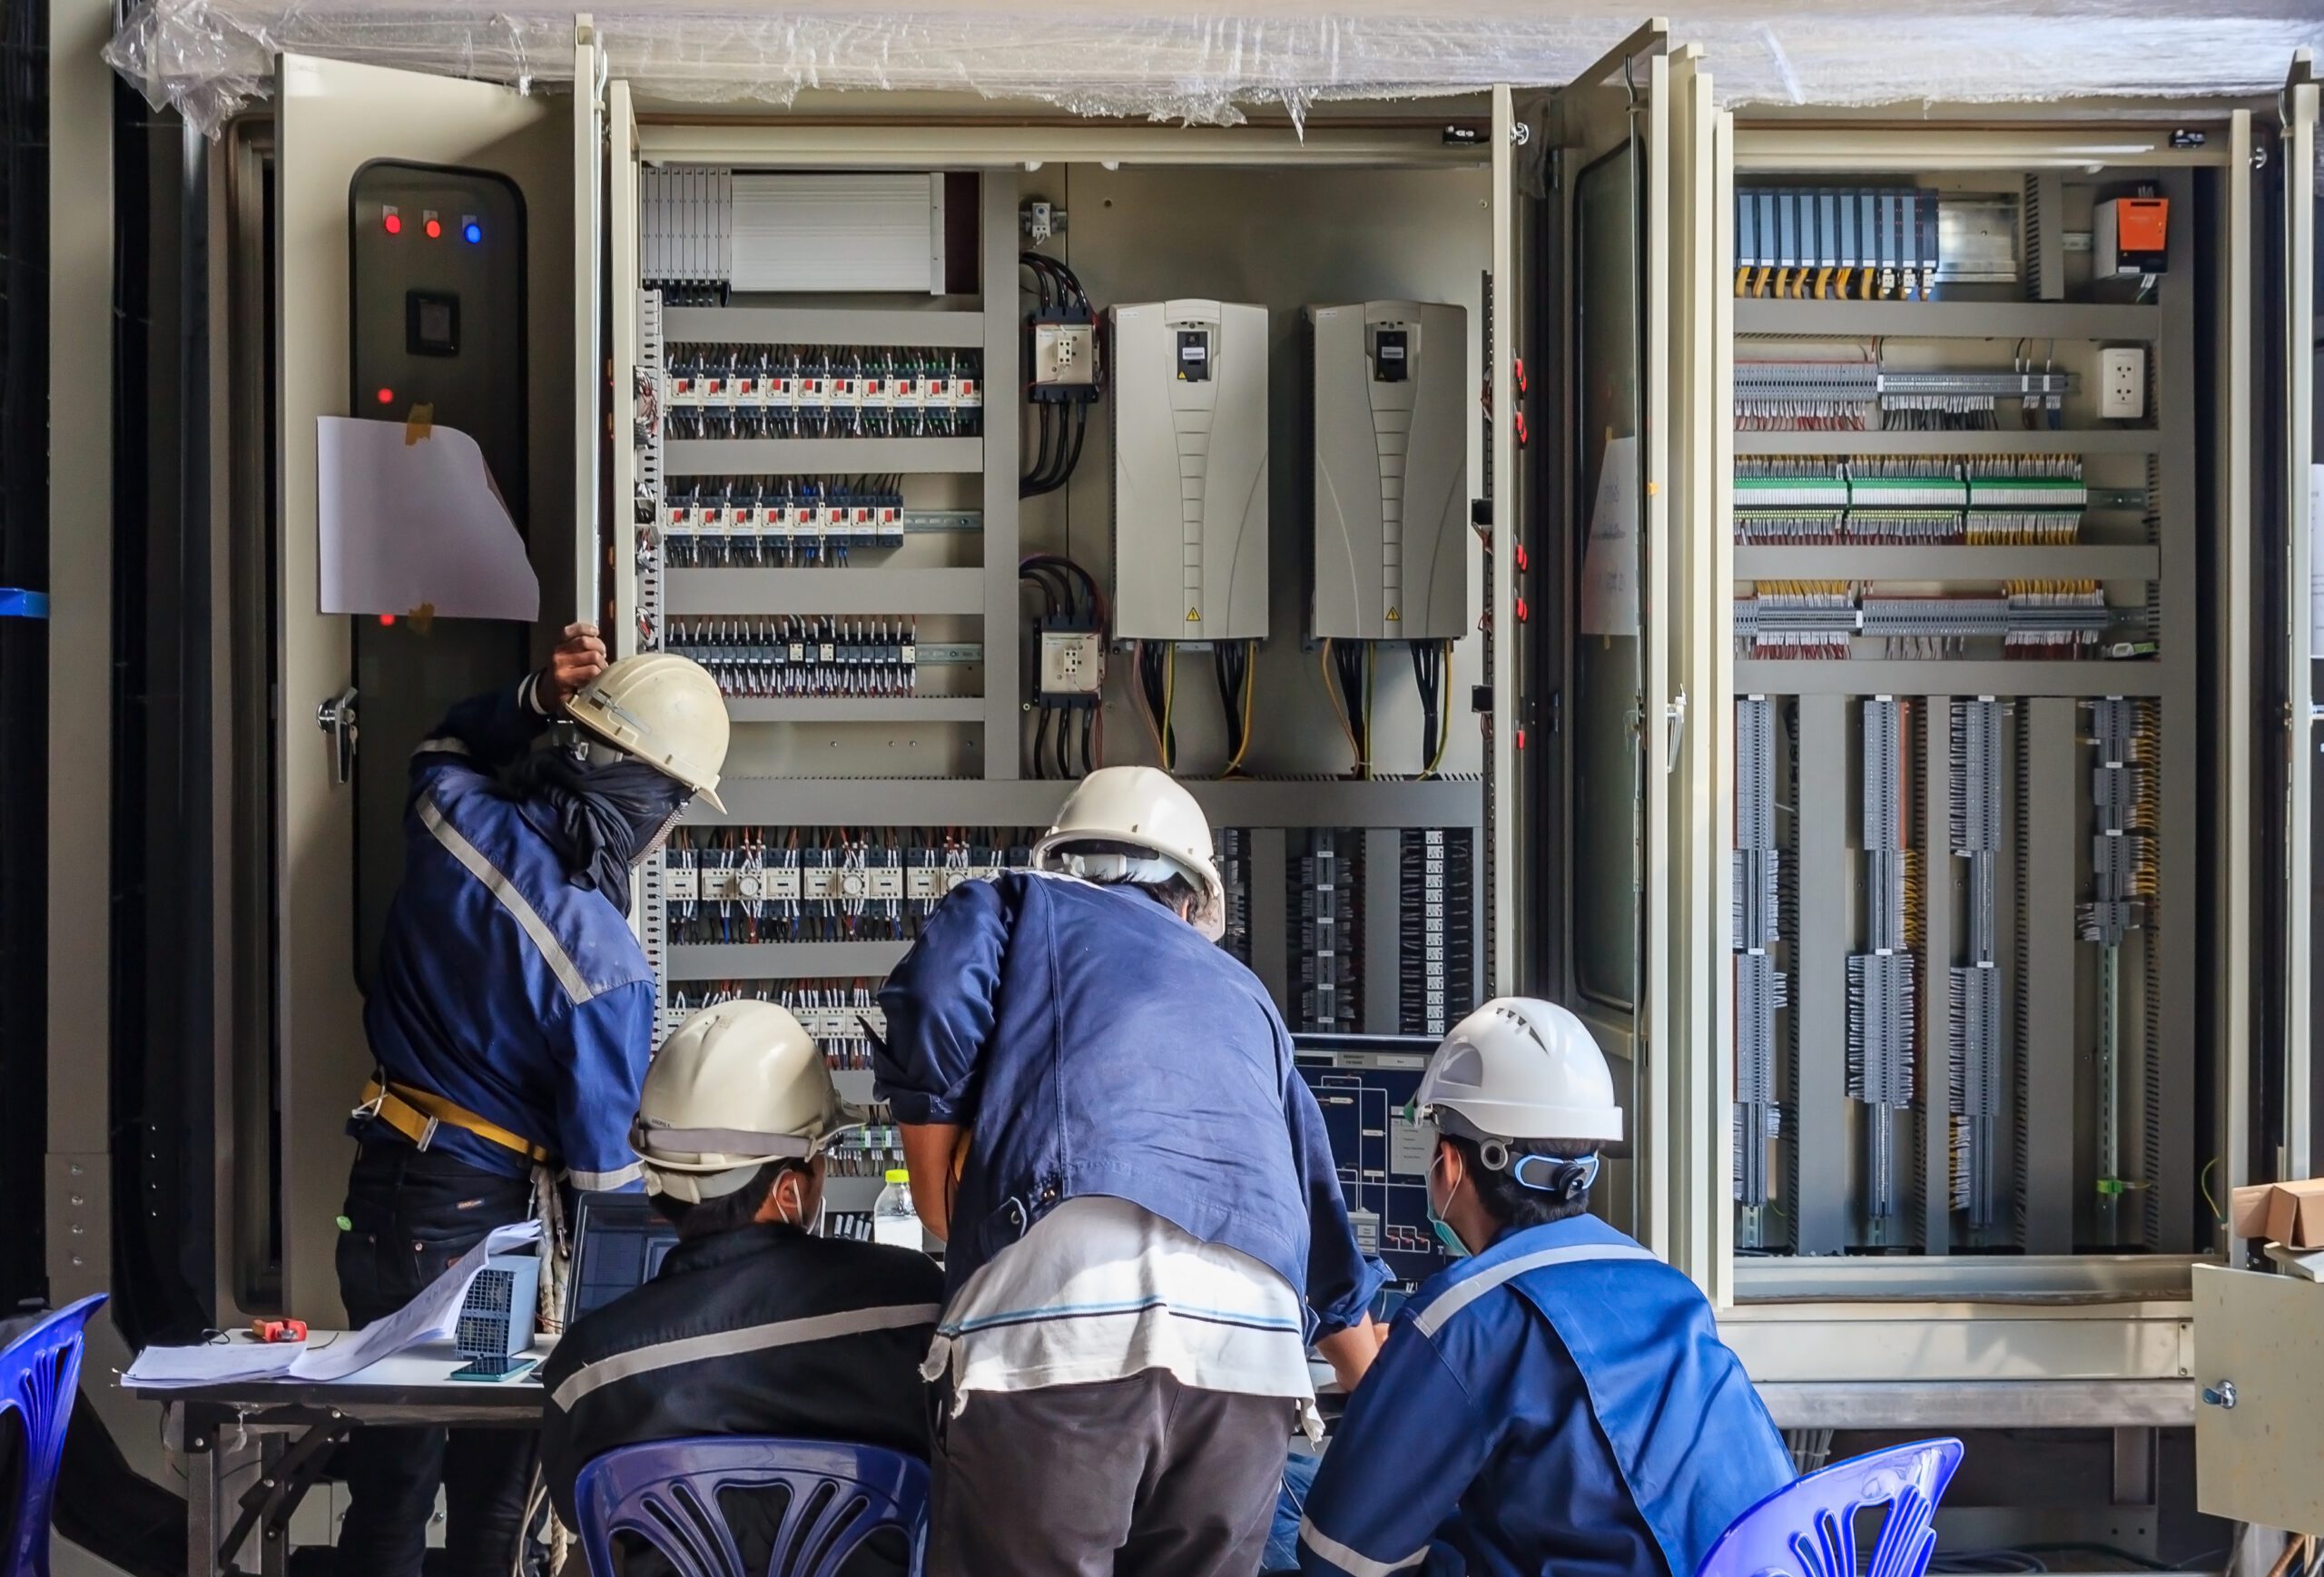 Equipment technicians who are integrating the control panels for processing equipment.